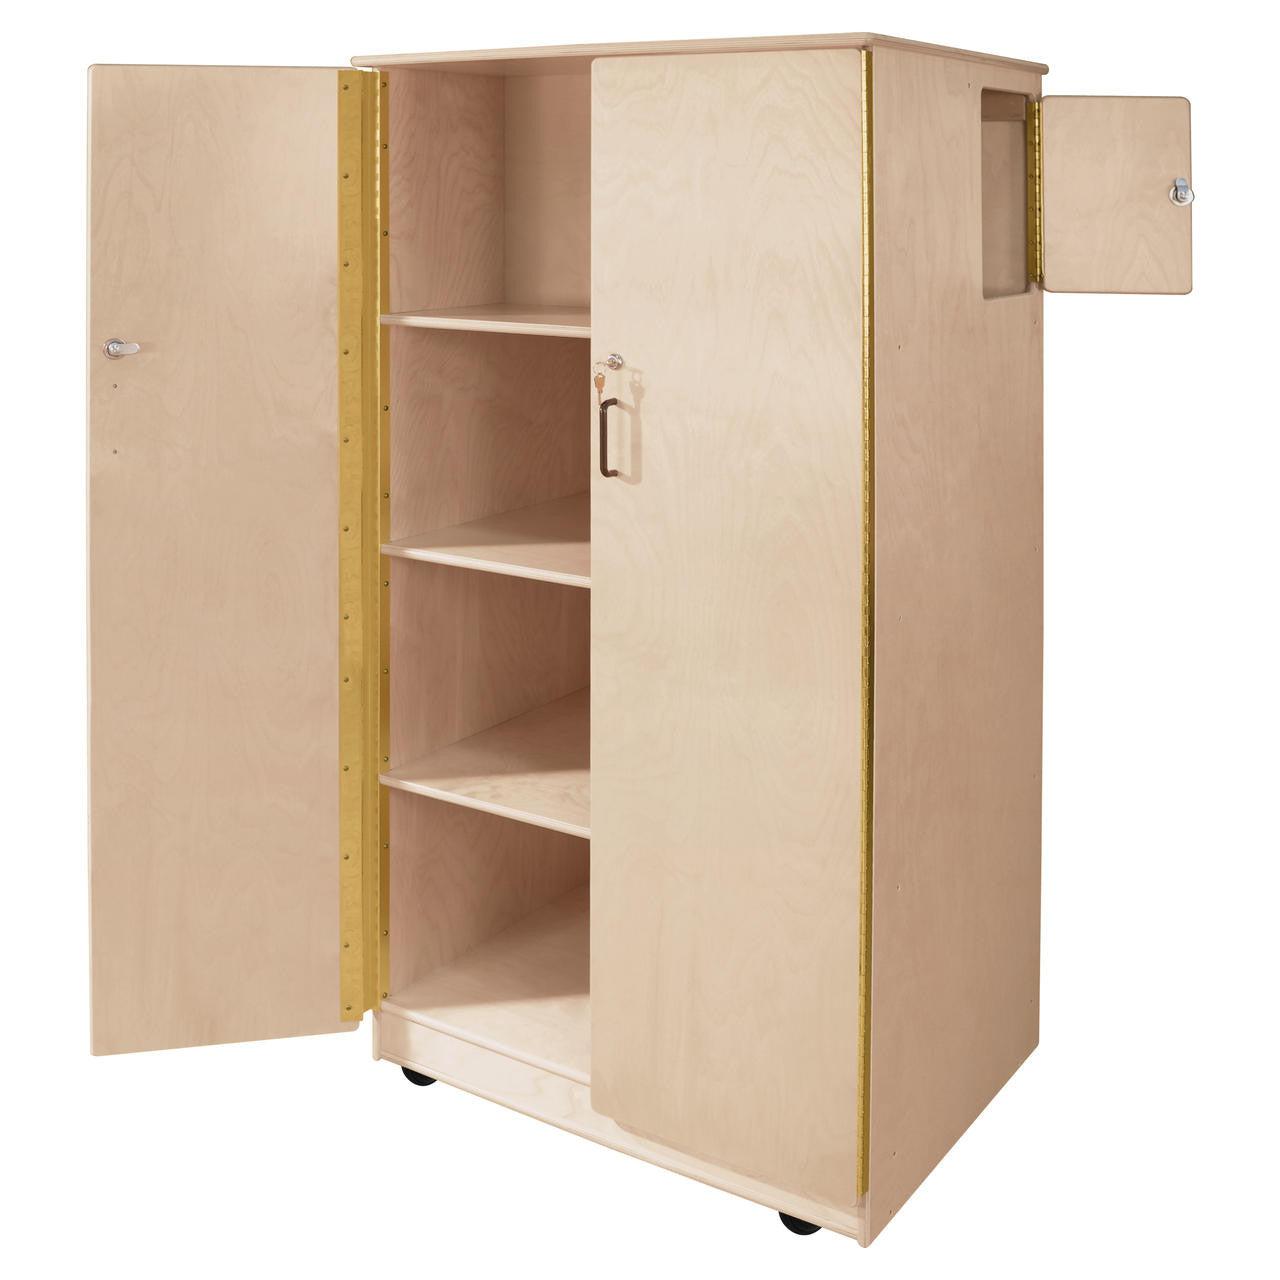 Tote Tray Cabinet with Locking Doors - FREE Shipping